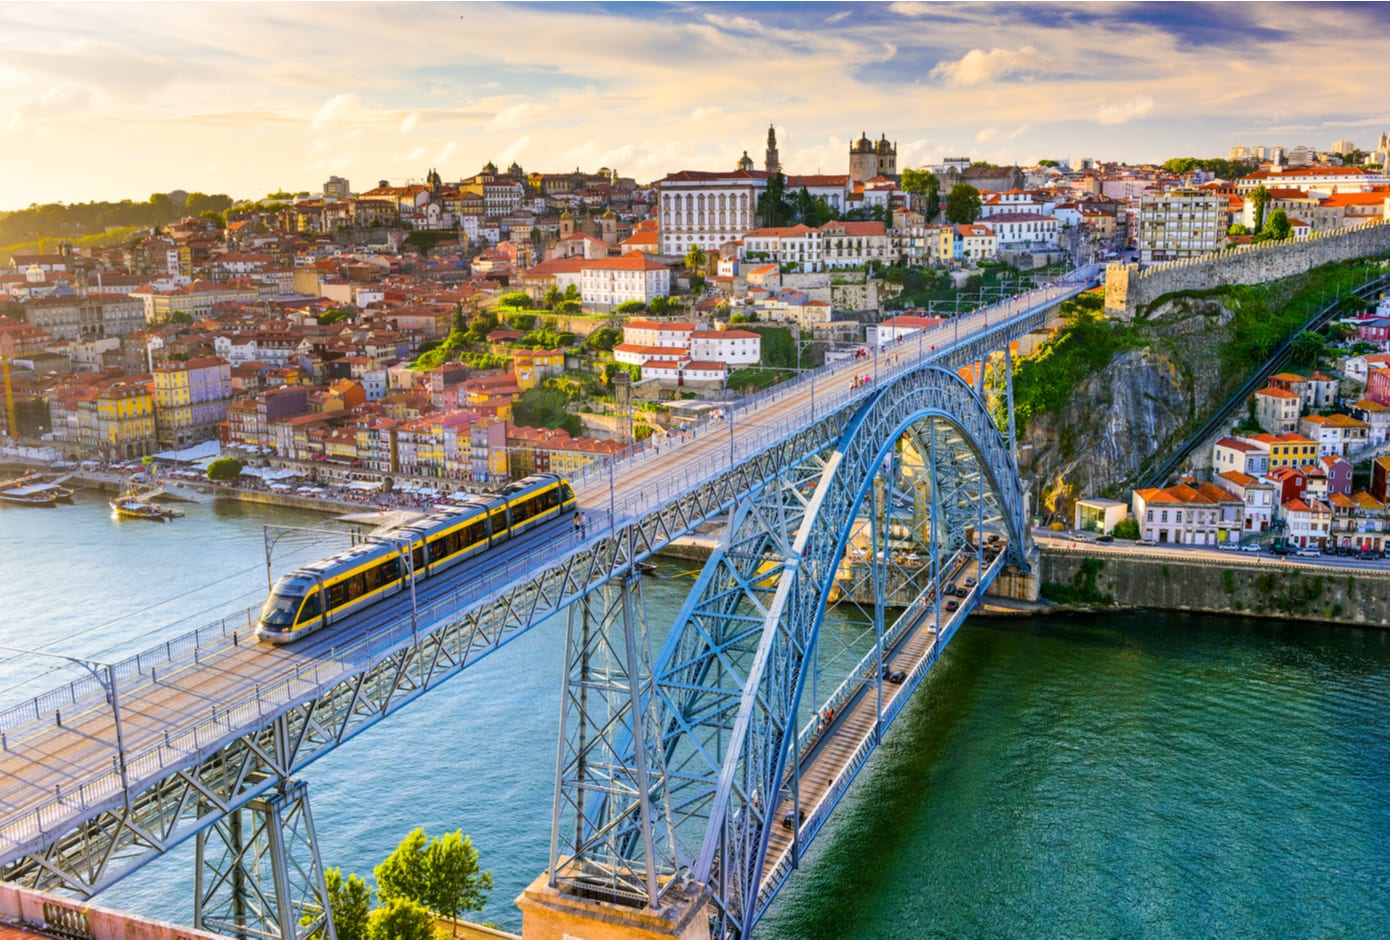 Aerial view of the Luís I Bridge, the Douro River, and the centre of Oporto.